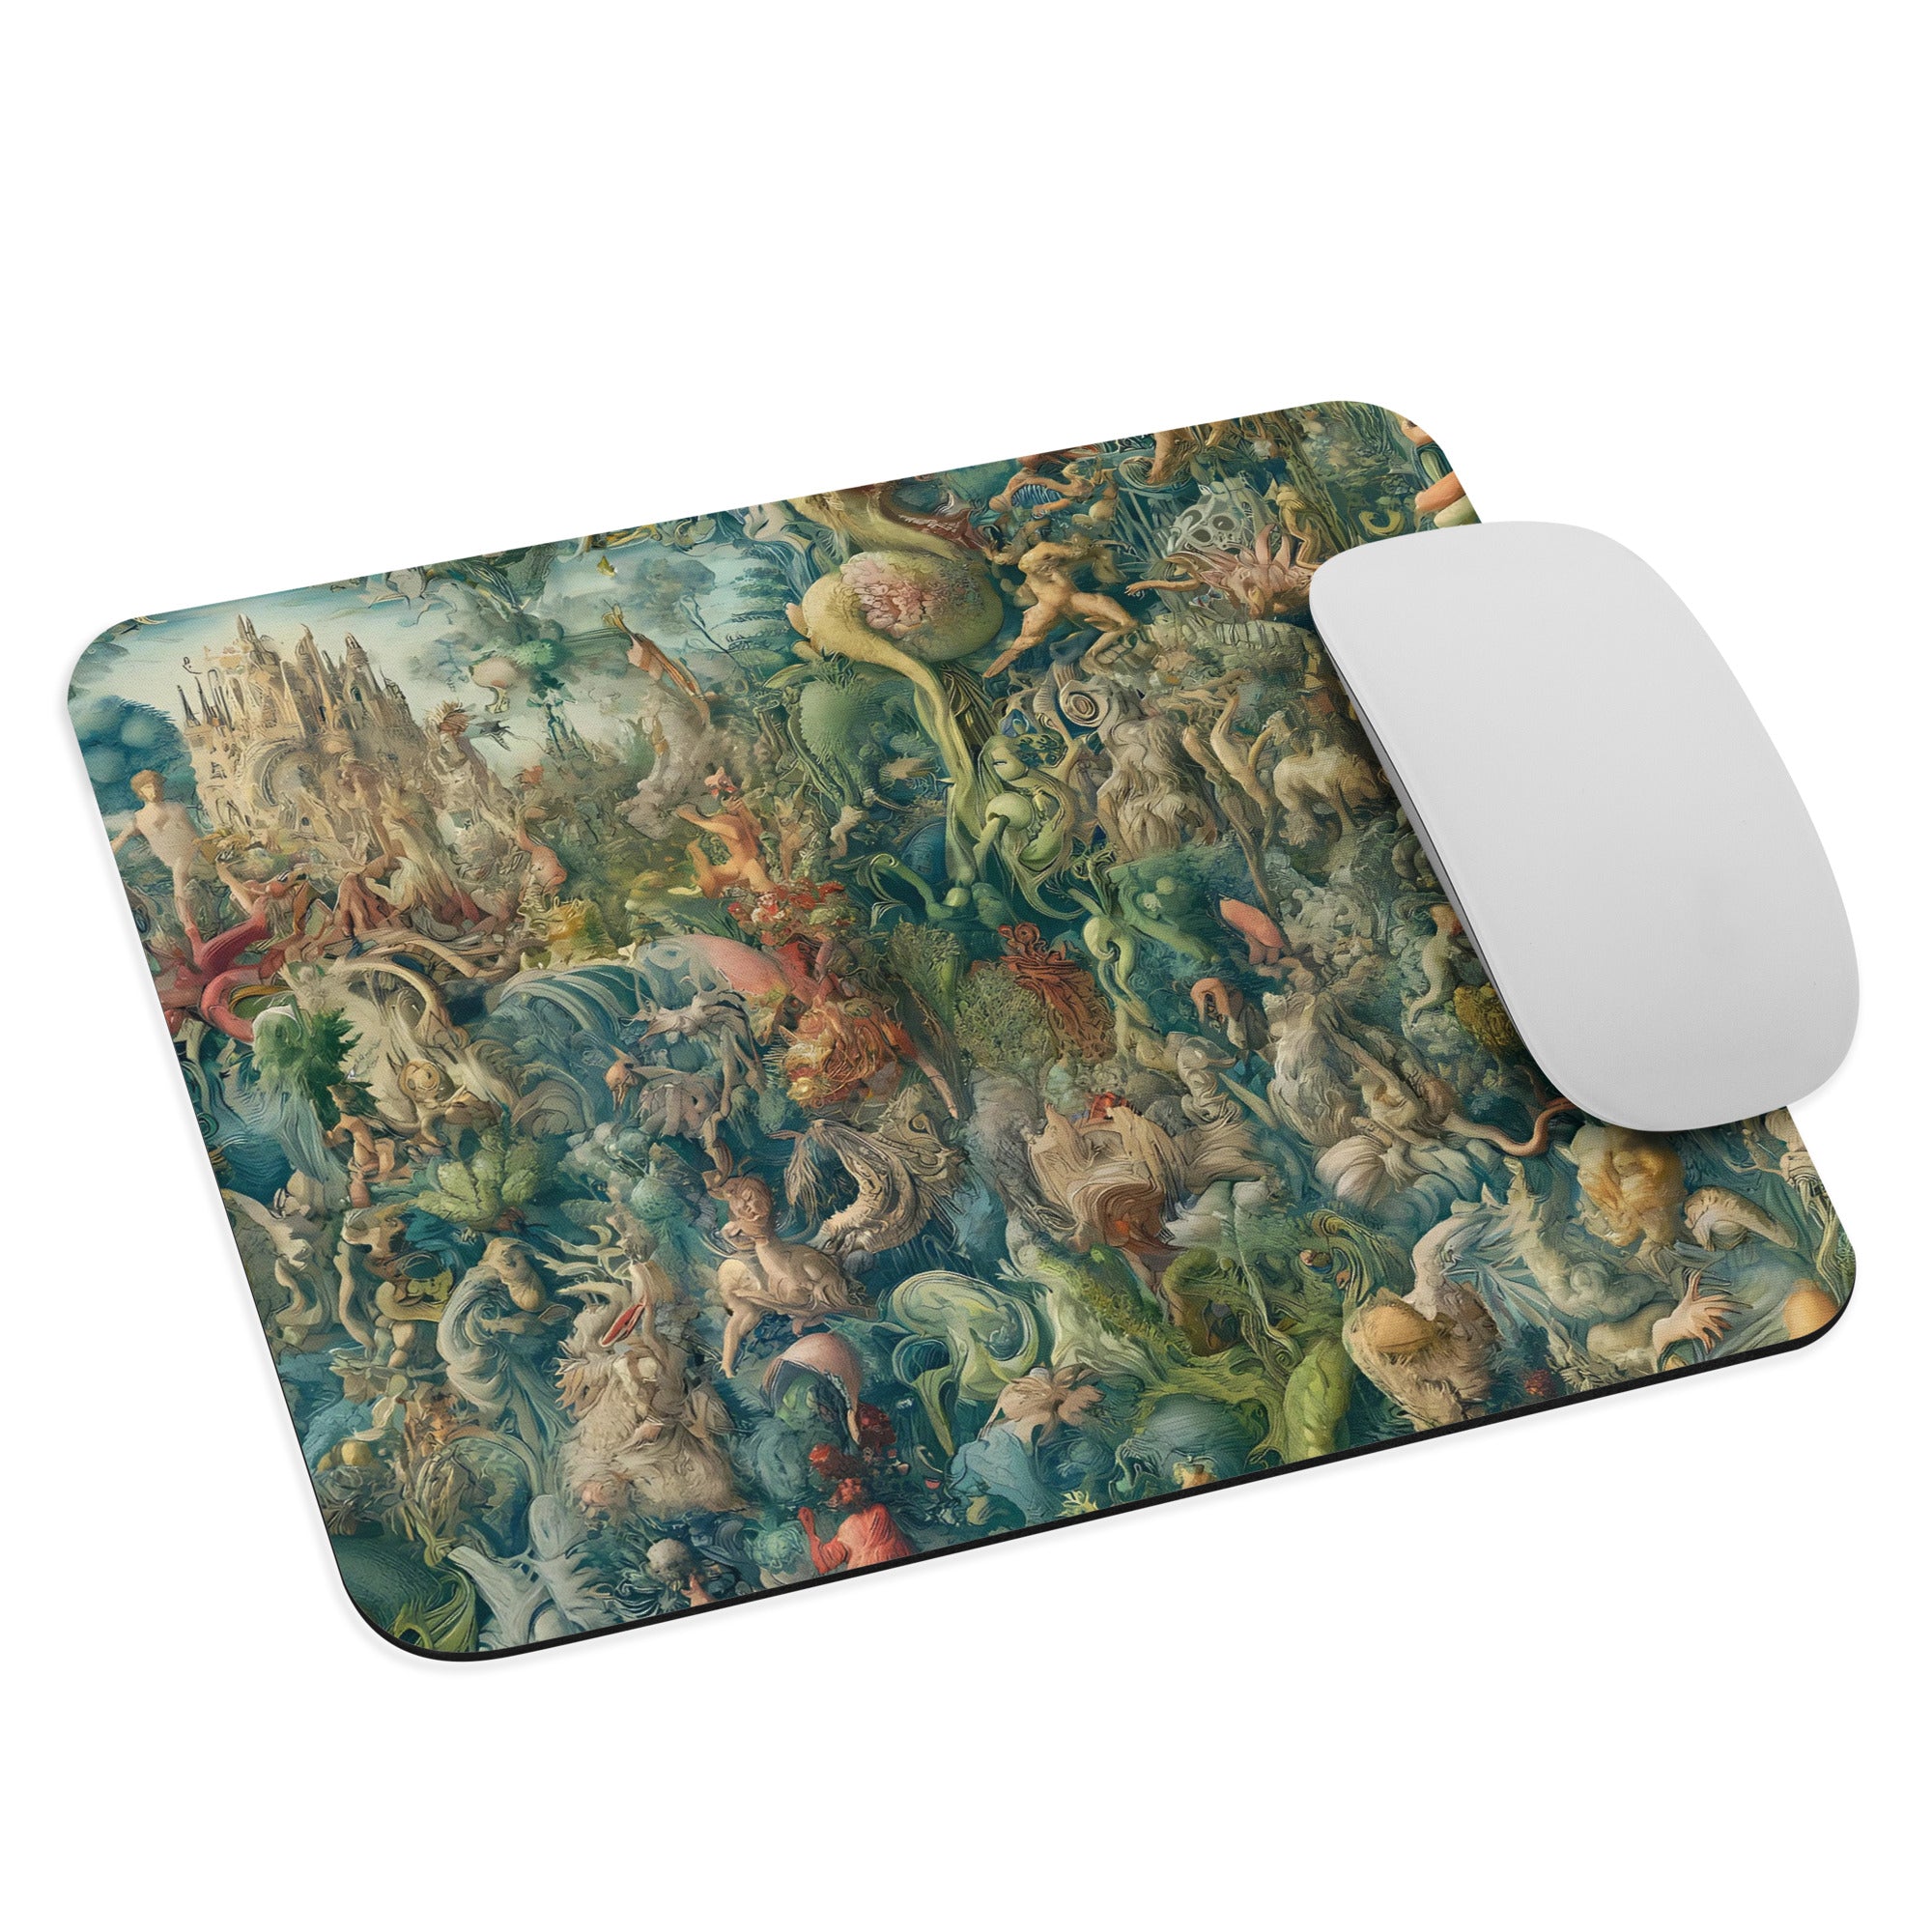 Hieronymus Bosch 'The Garden of Earthly Delights' Famous Painting Mouse Pad | Premium Art Mouse Pad